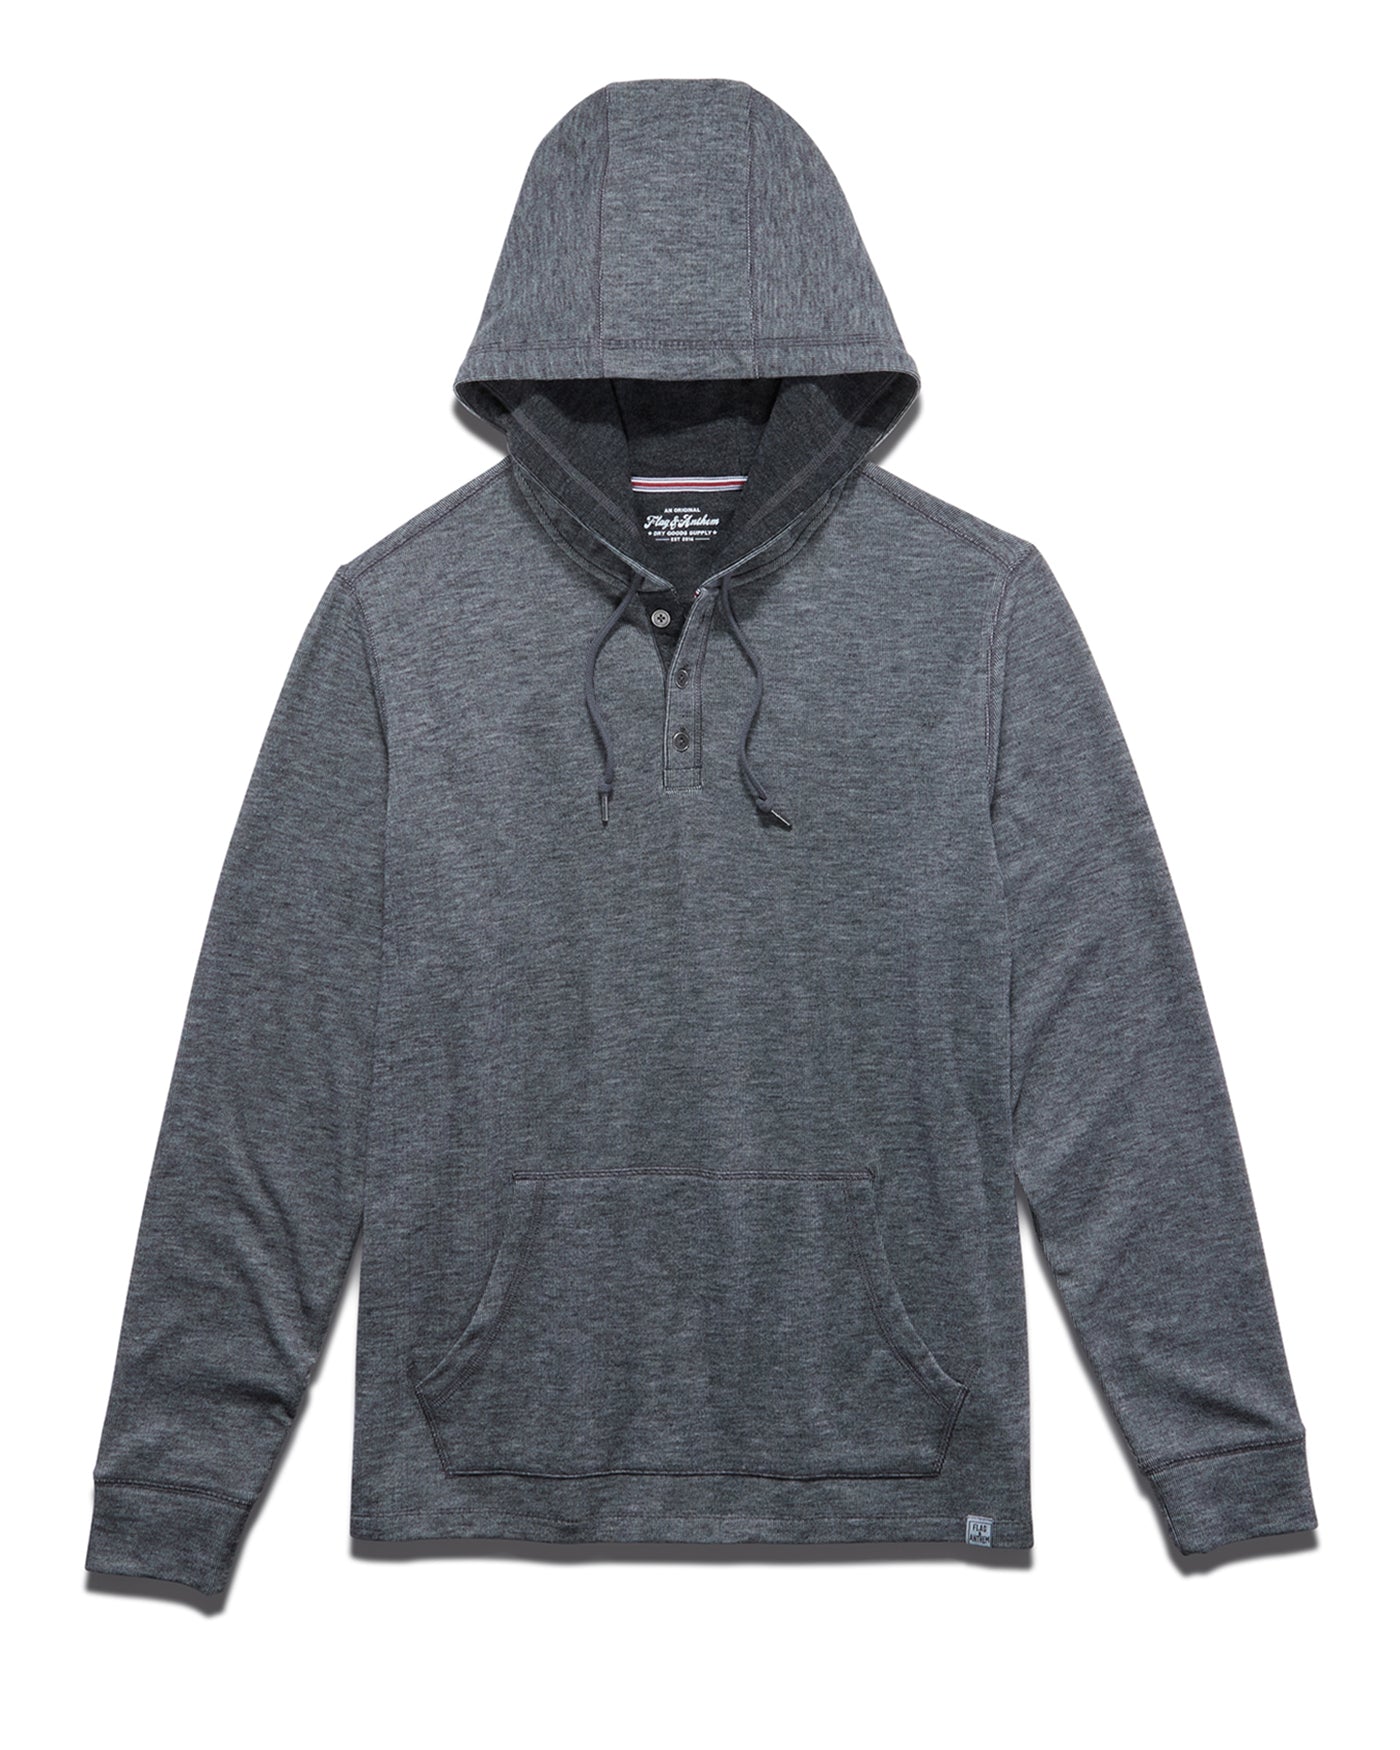 HERO TEXTURED STRETCH HOODED HENLEY